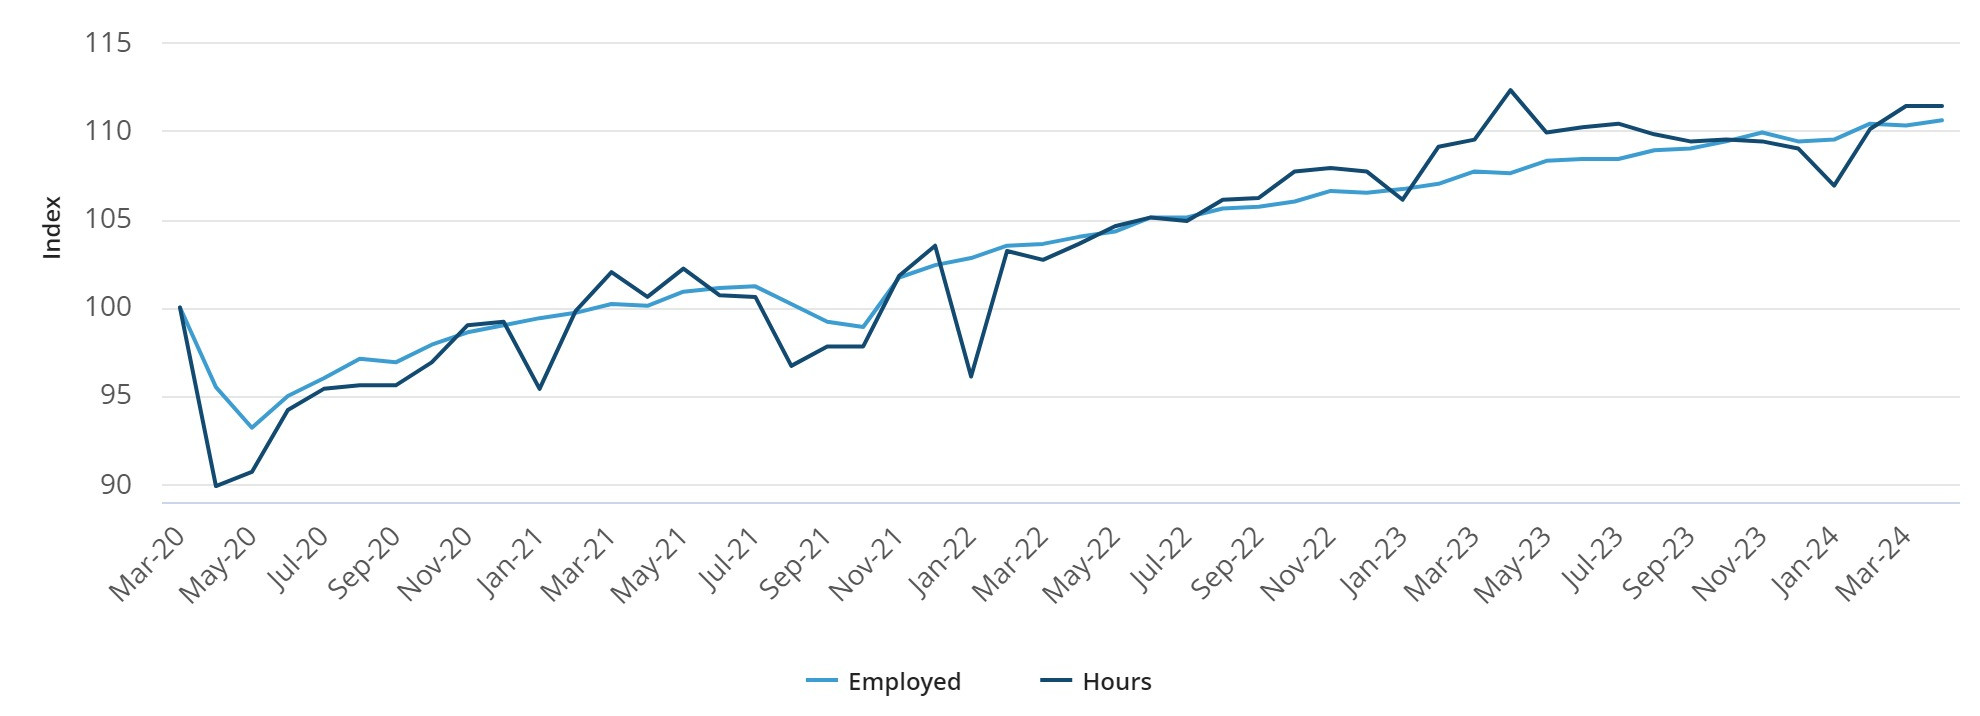 Australian Employment and Hours Worked